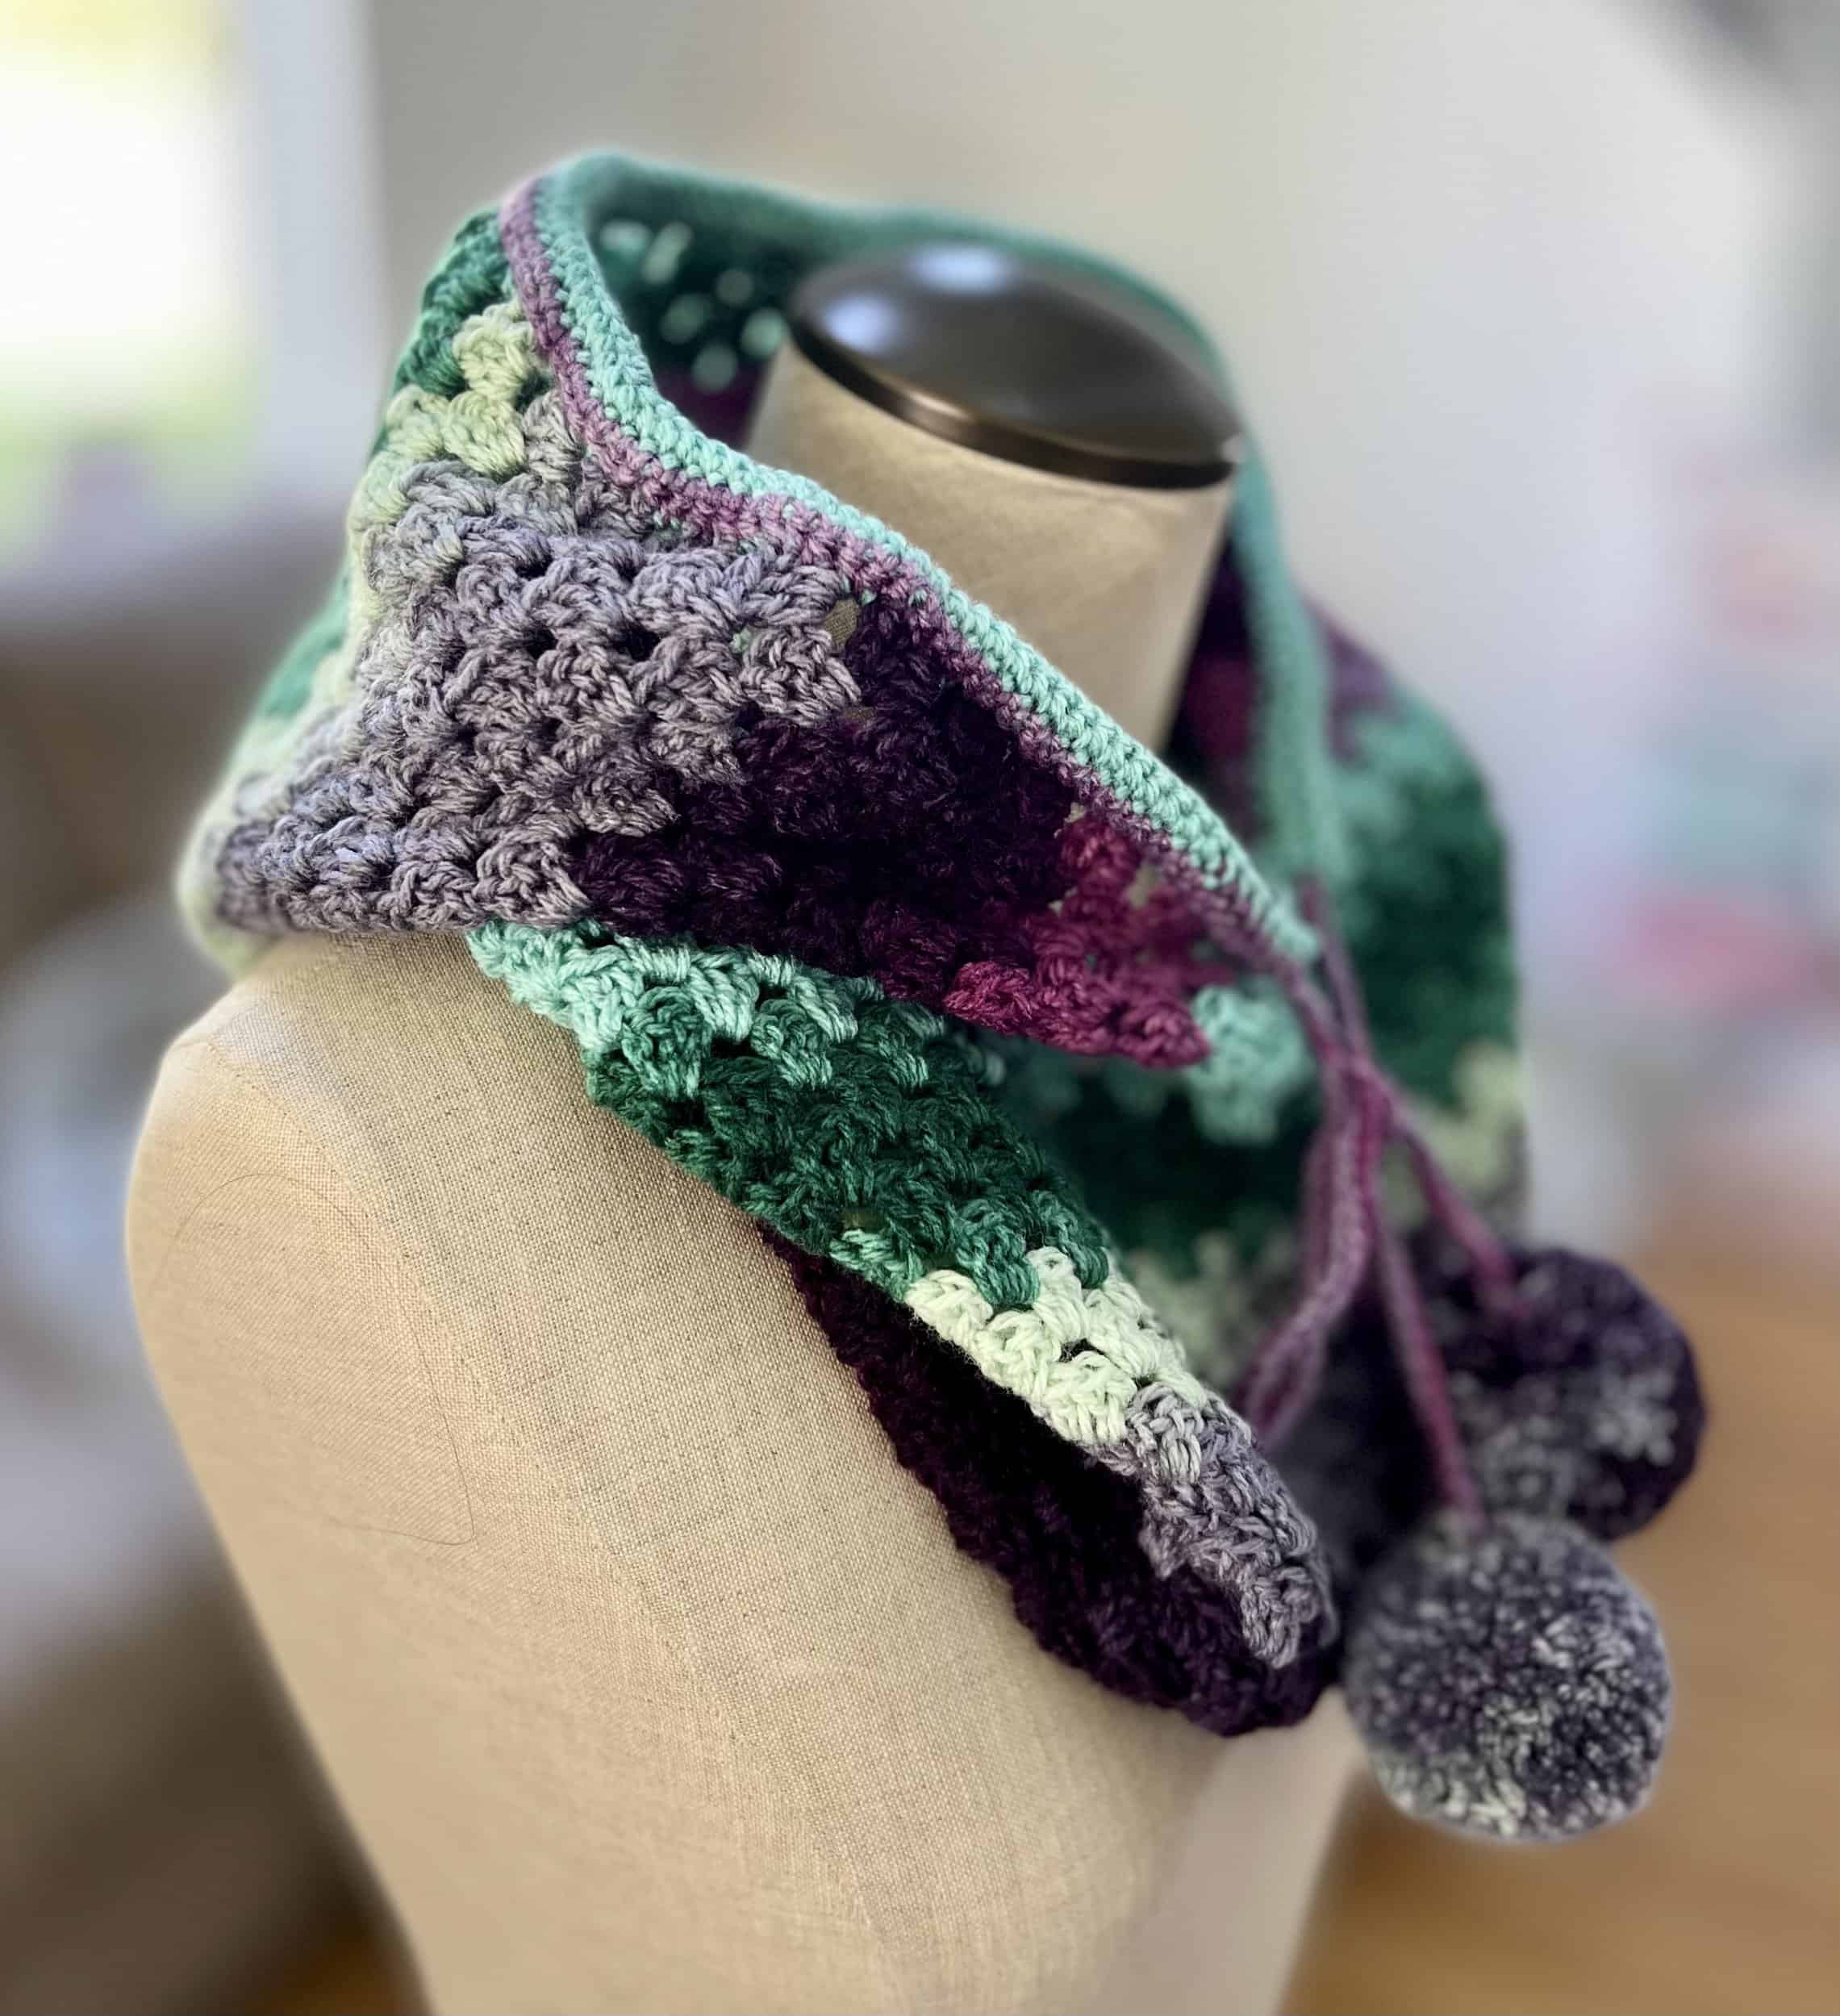 This “Winnie” Hoddie Cowl is made with love by Classy Crafty Wife! Shop more unique gift ideas today with Spots Initiatives, the best way to support creators.